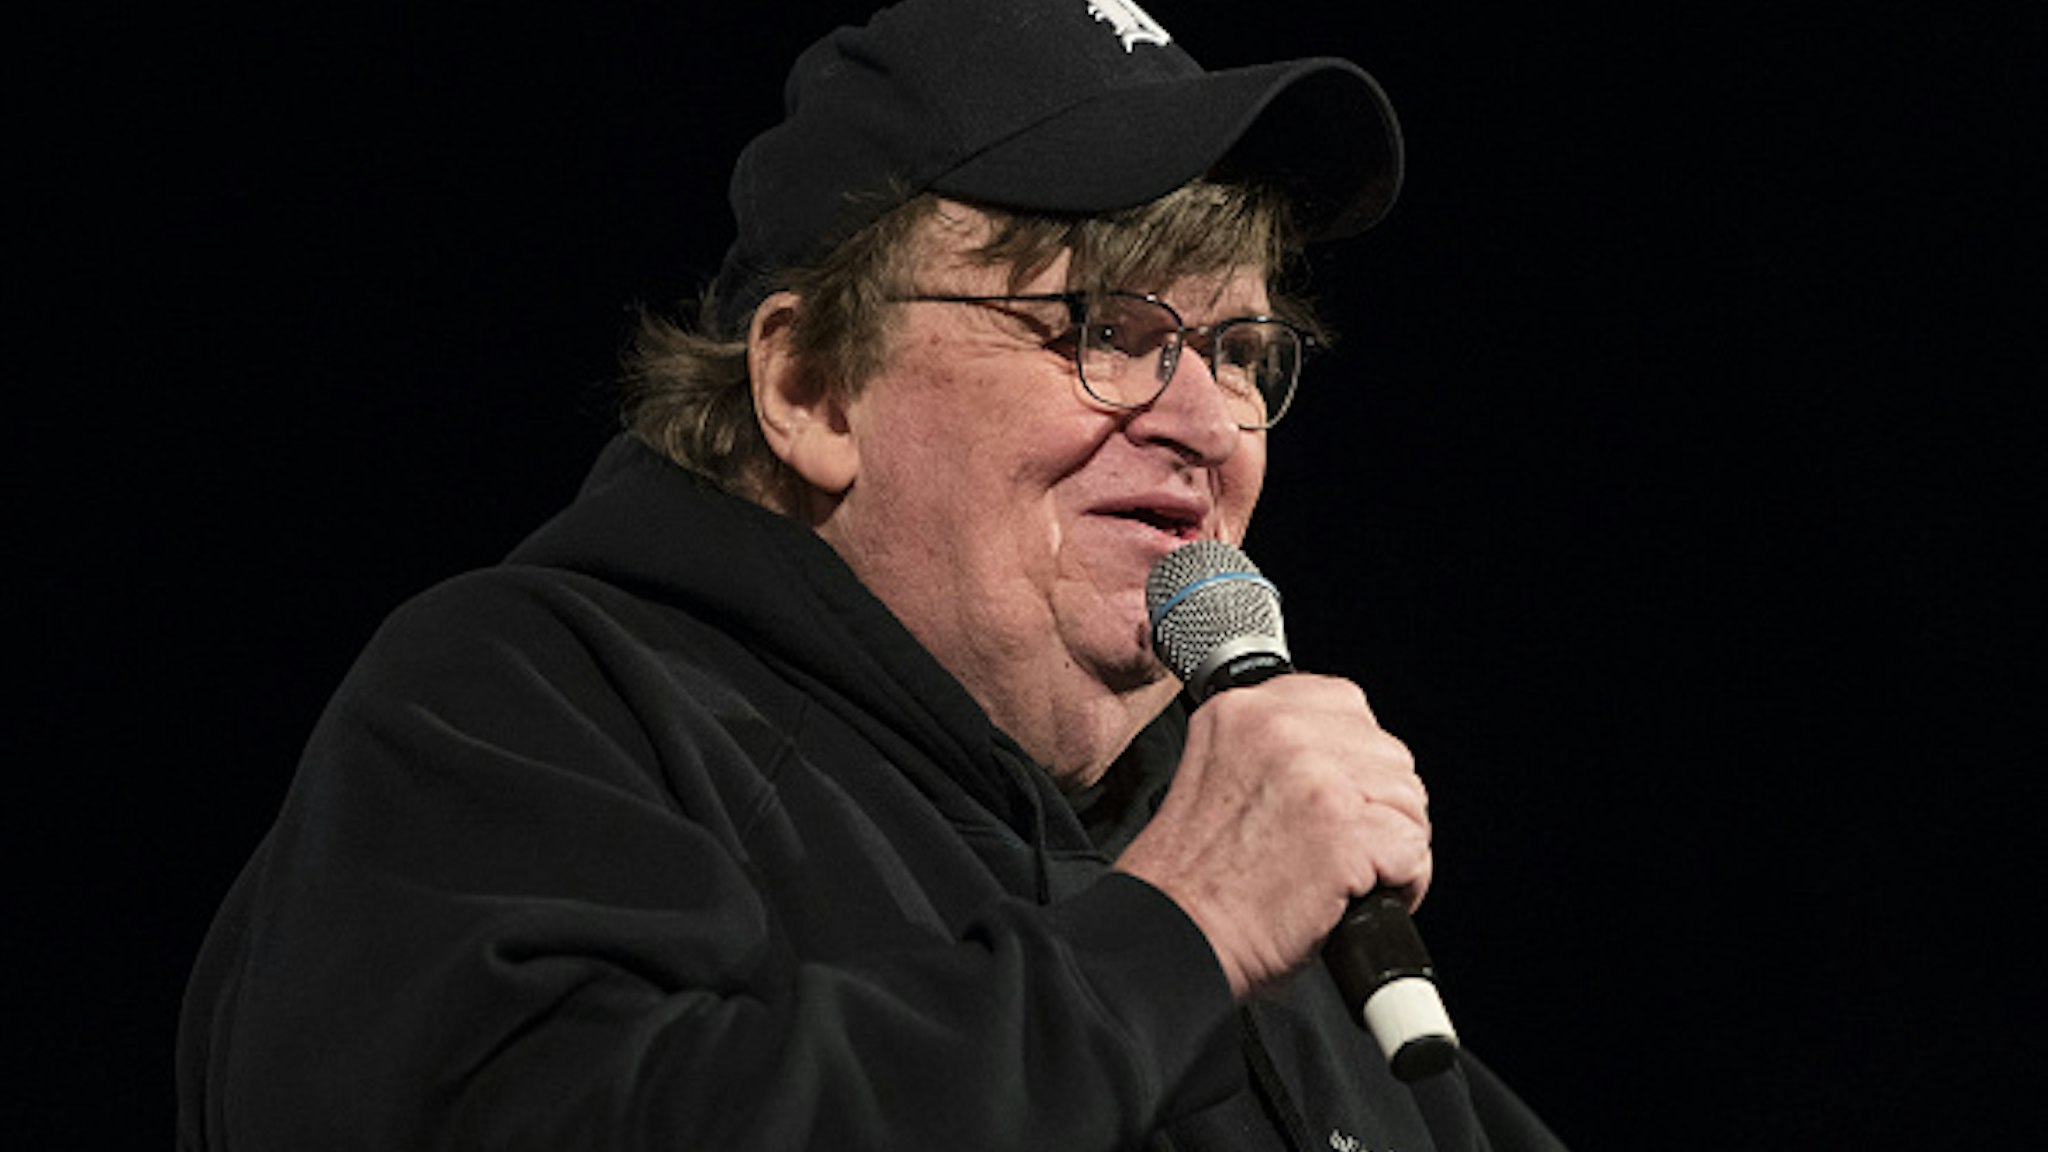 Michael Moore, American filmmaker, speaks during a campaign event for Senator Bernie Sanders, an Independent from Vermont and 2020 presidential candidate, during a town hall event in Rochester, New Hampshire, U.S., on Saturday, Feb. 8, 2020. Sanders is favored to win New Hampshire, but recent polls showed Pete Buttigieg cutting into his lead.